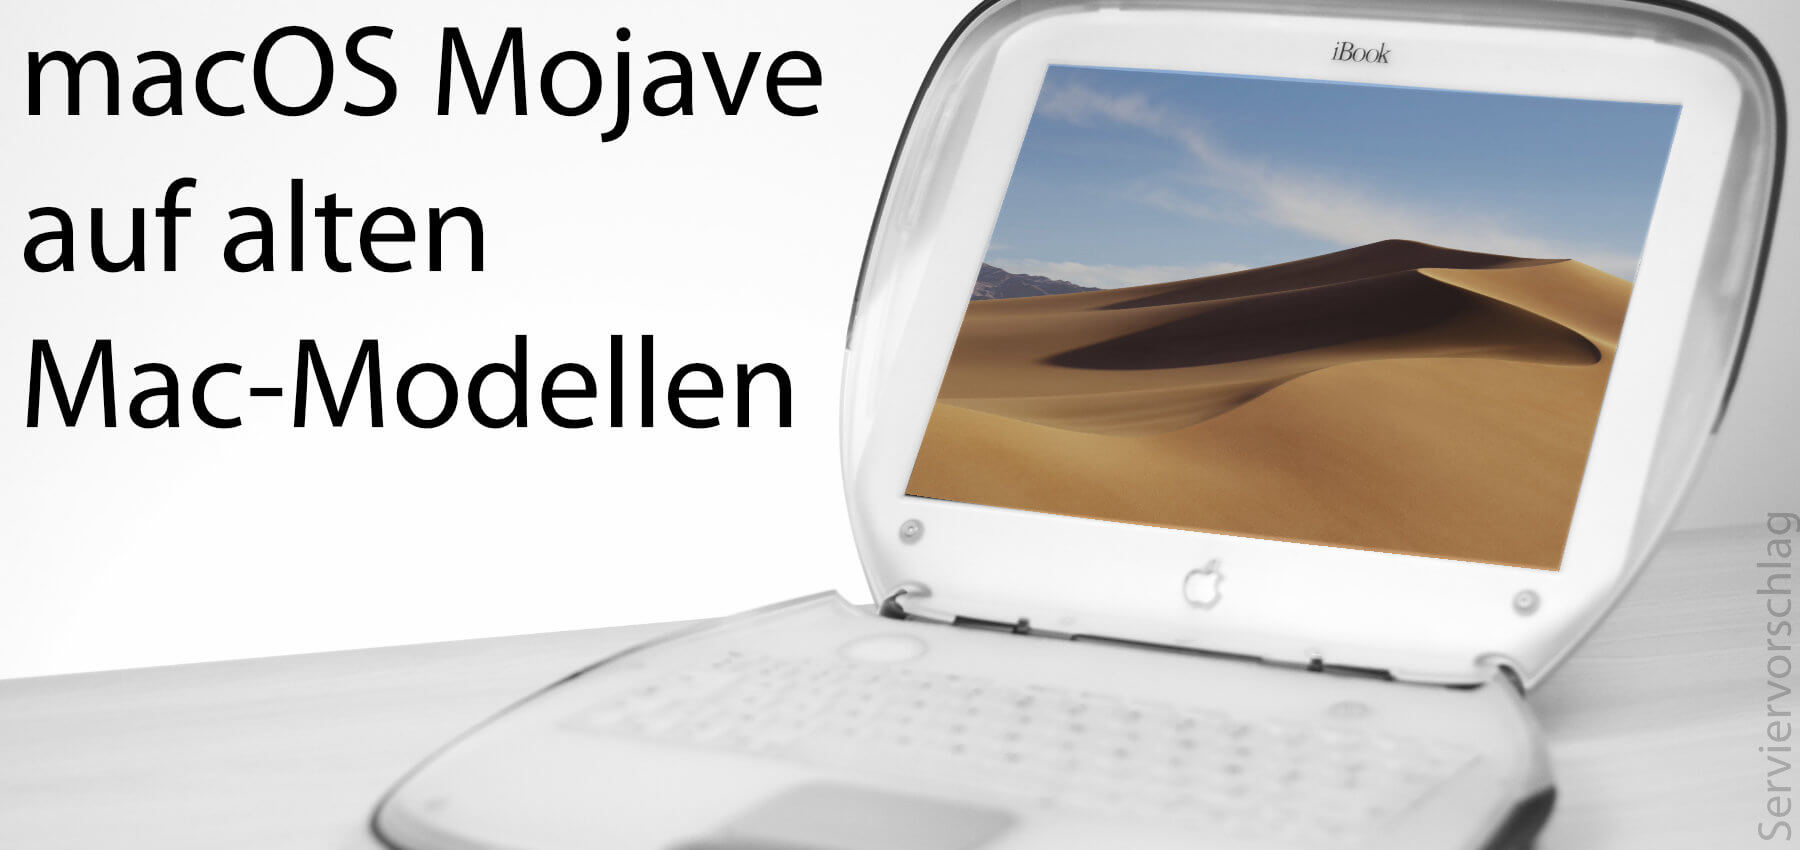 install macos mojave on unsupported mac